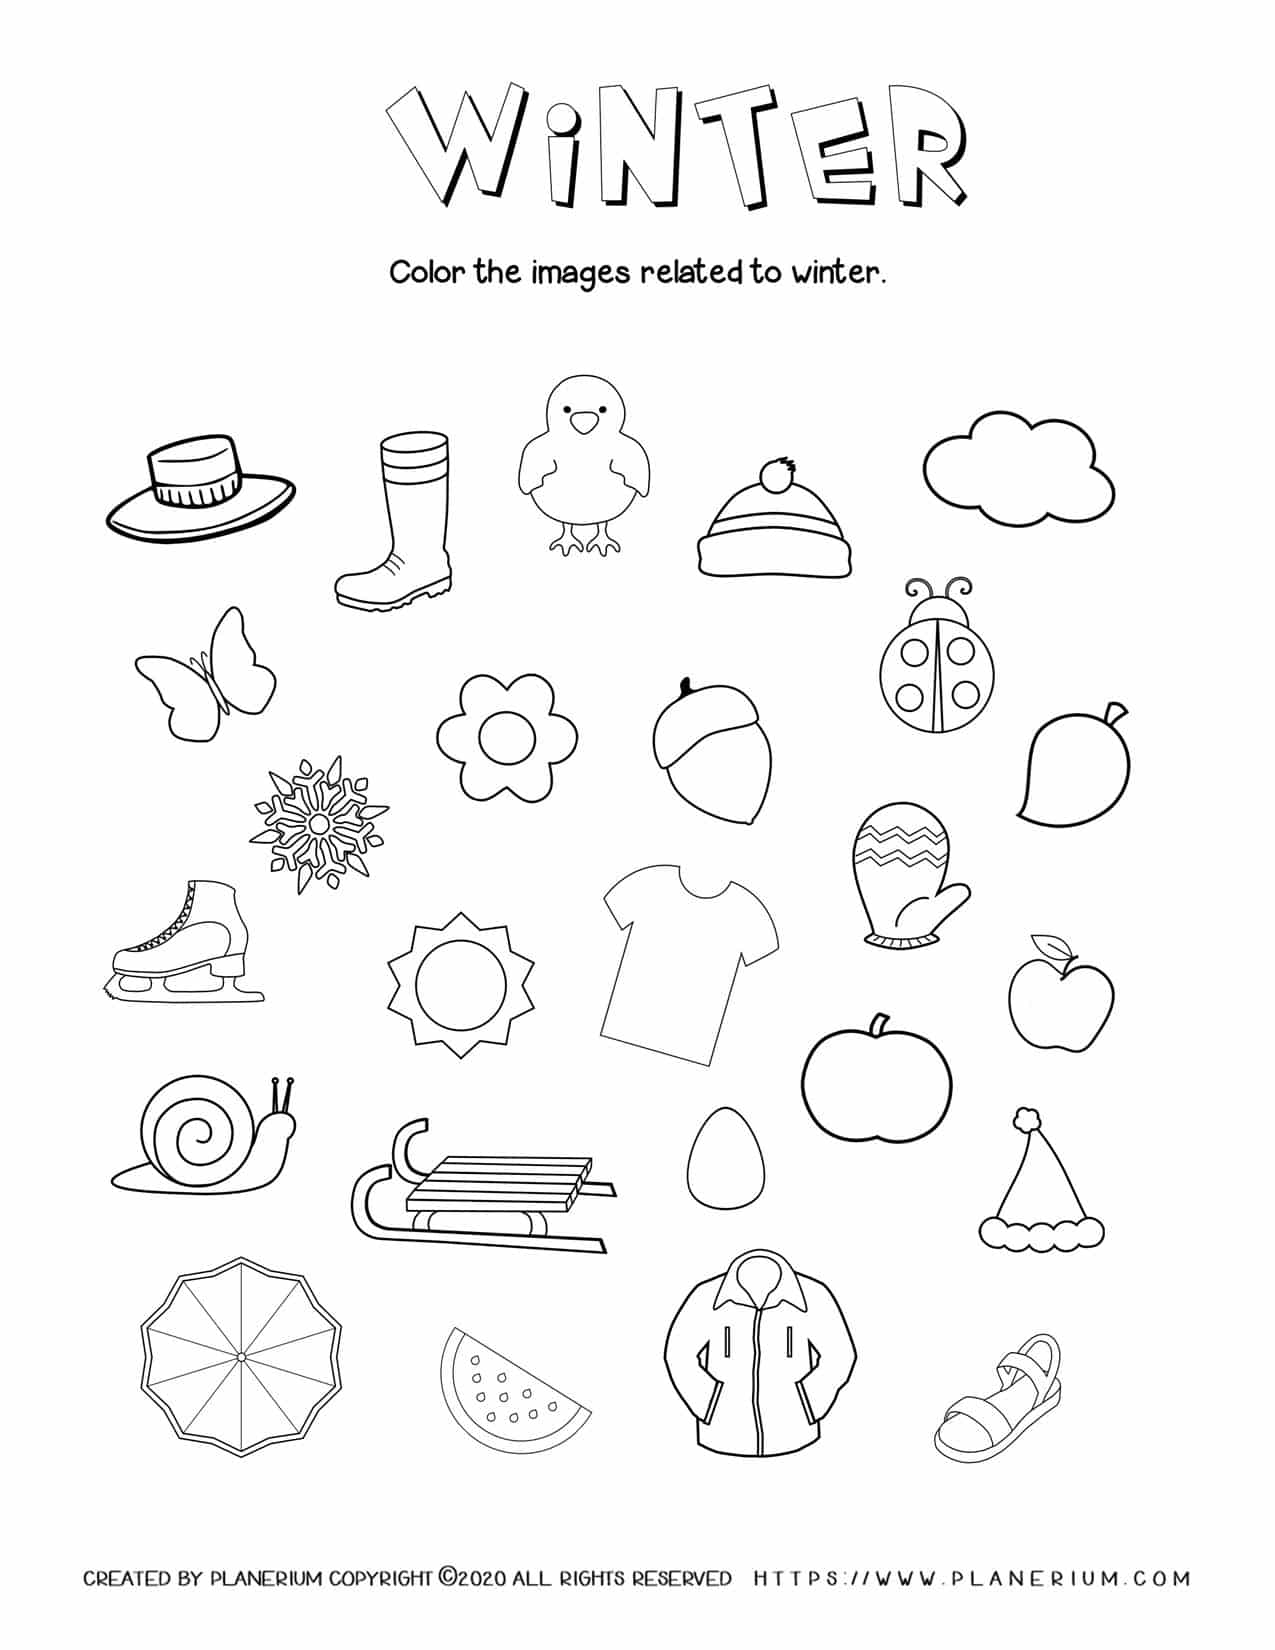 Coloring Winter Related Objects - Free Worksheet | Planerium